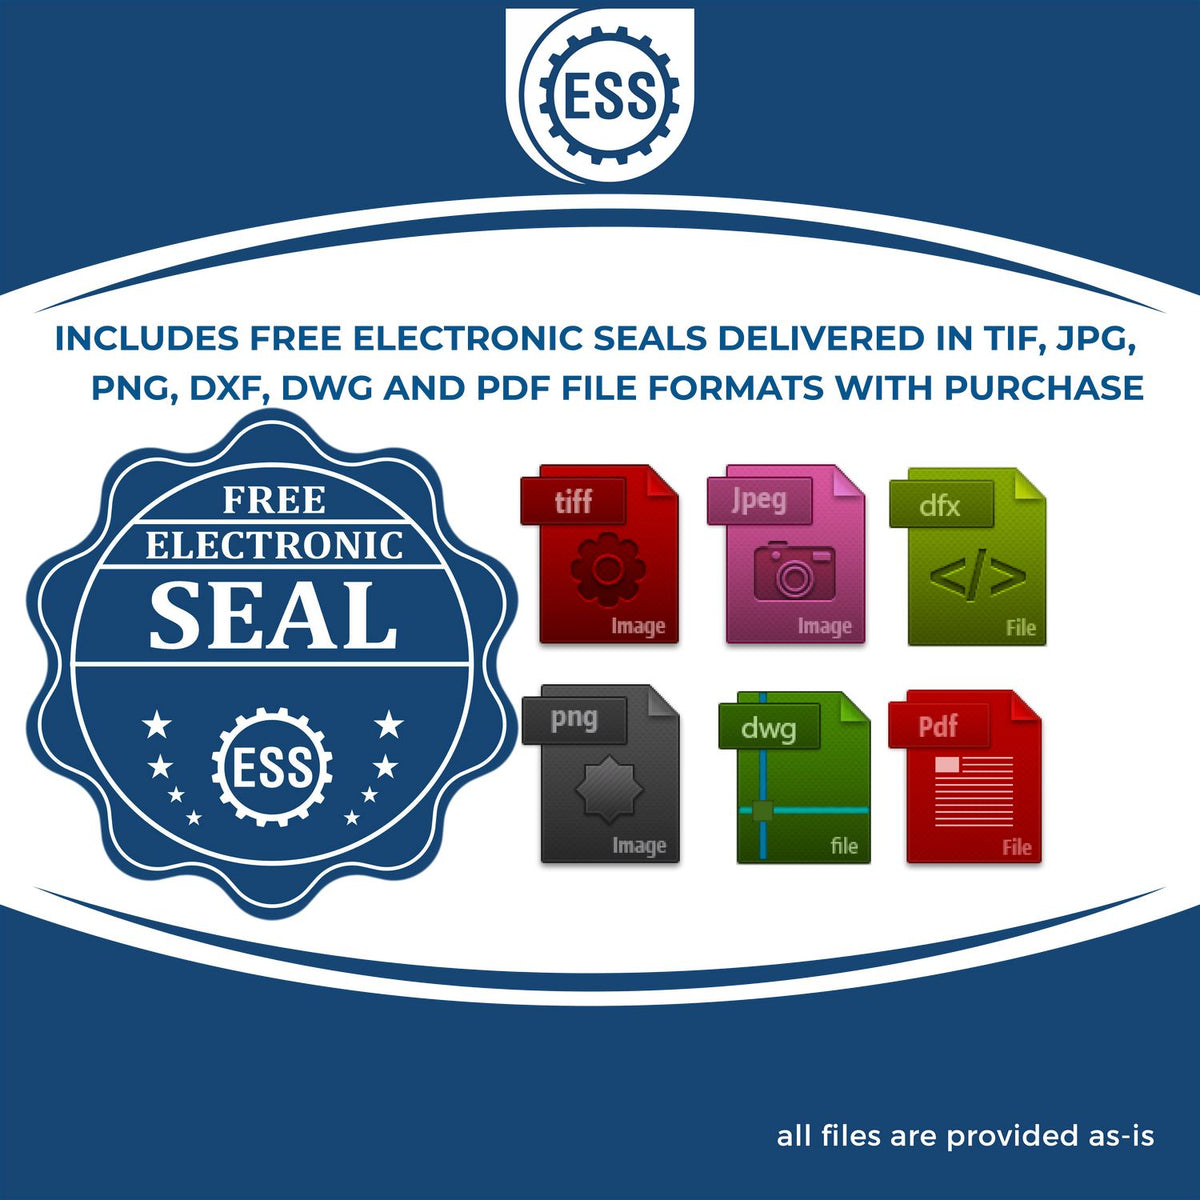 An infographic for the free electronic seal for the Gift Arizona Engineer Seal illustrating the different file type icons such as DXF, DWG, TIF, JPG and PNG.